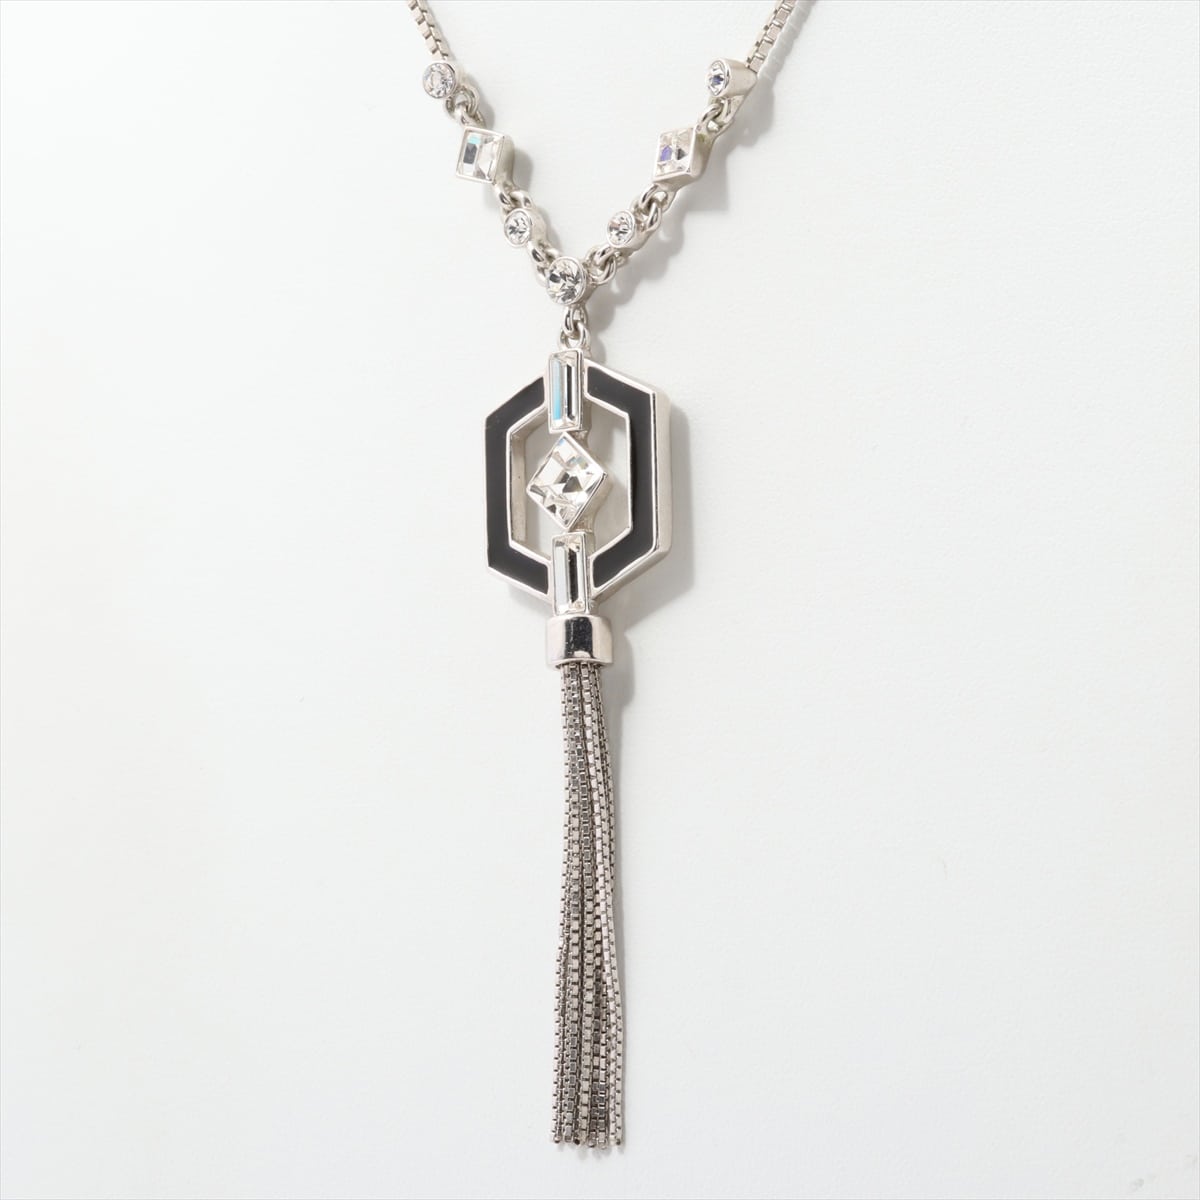 Givenchy Necklace Metallic material Fringe Rhinestone Silver